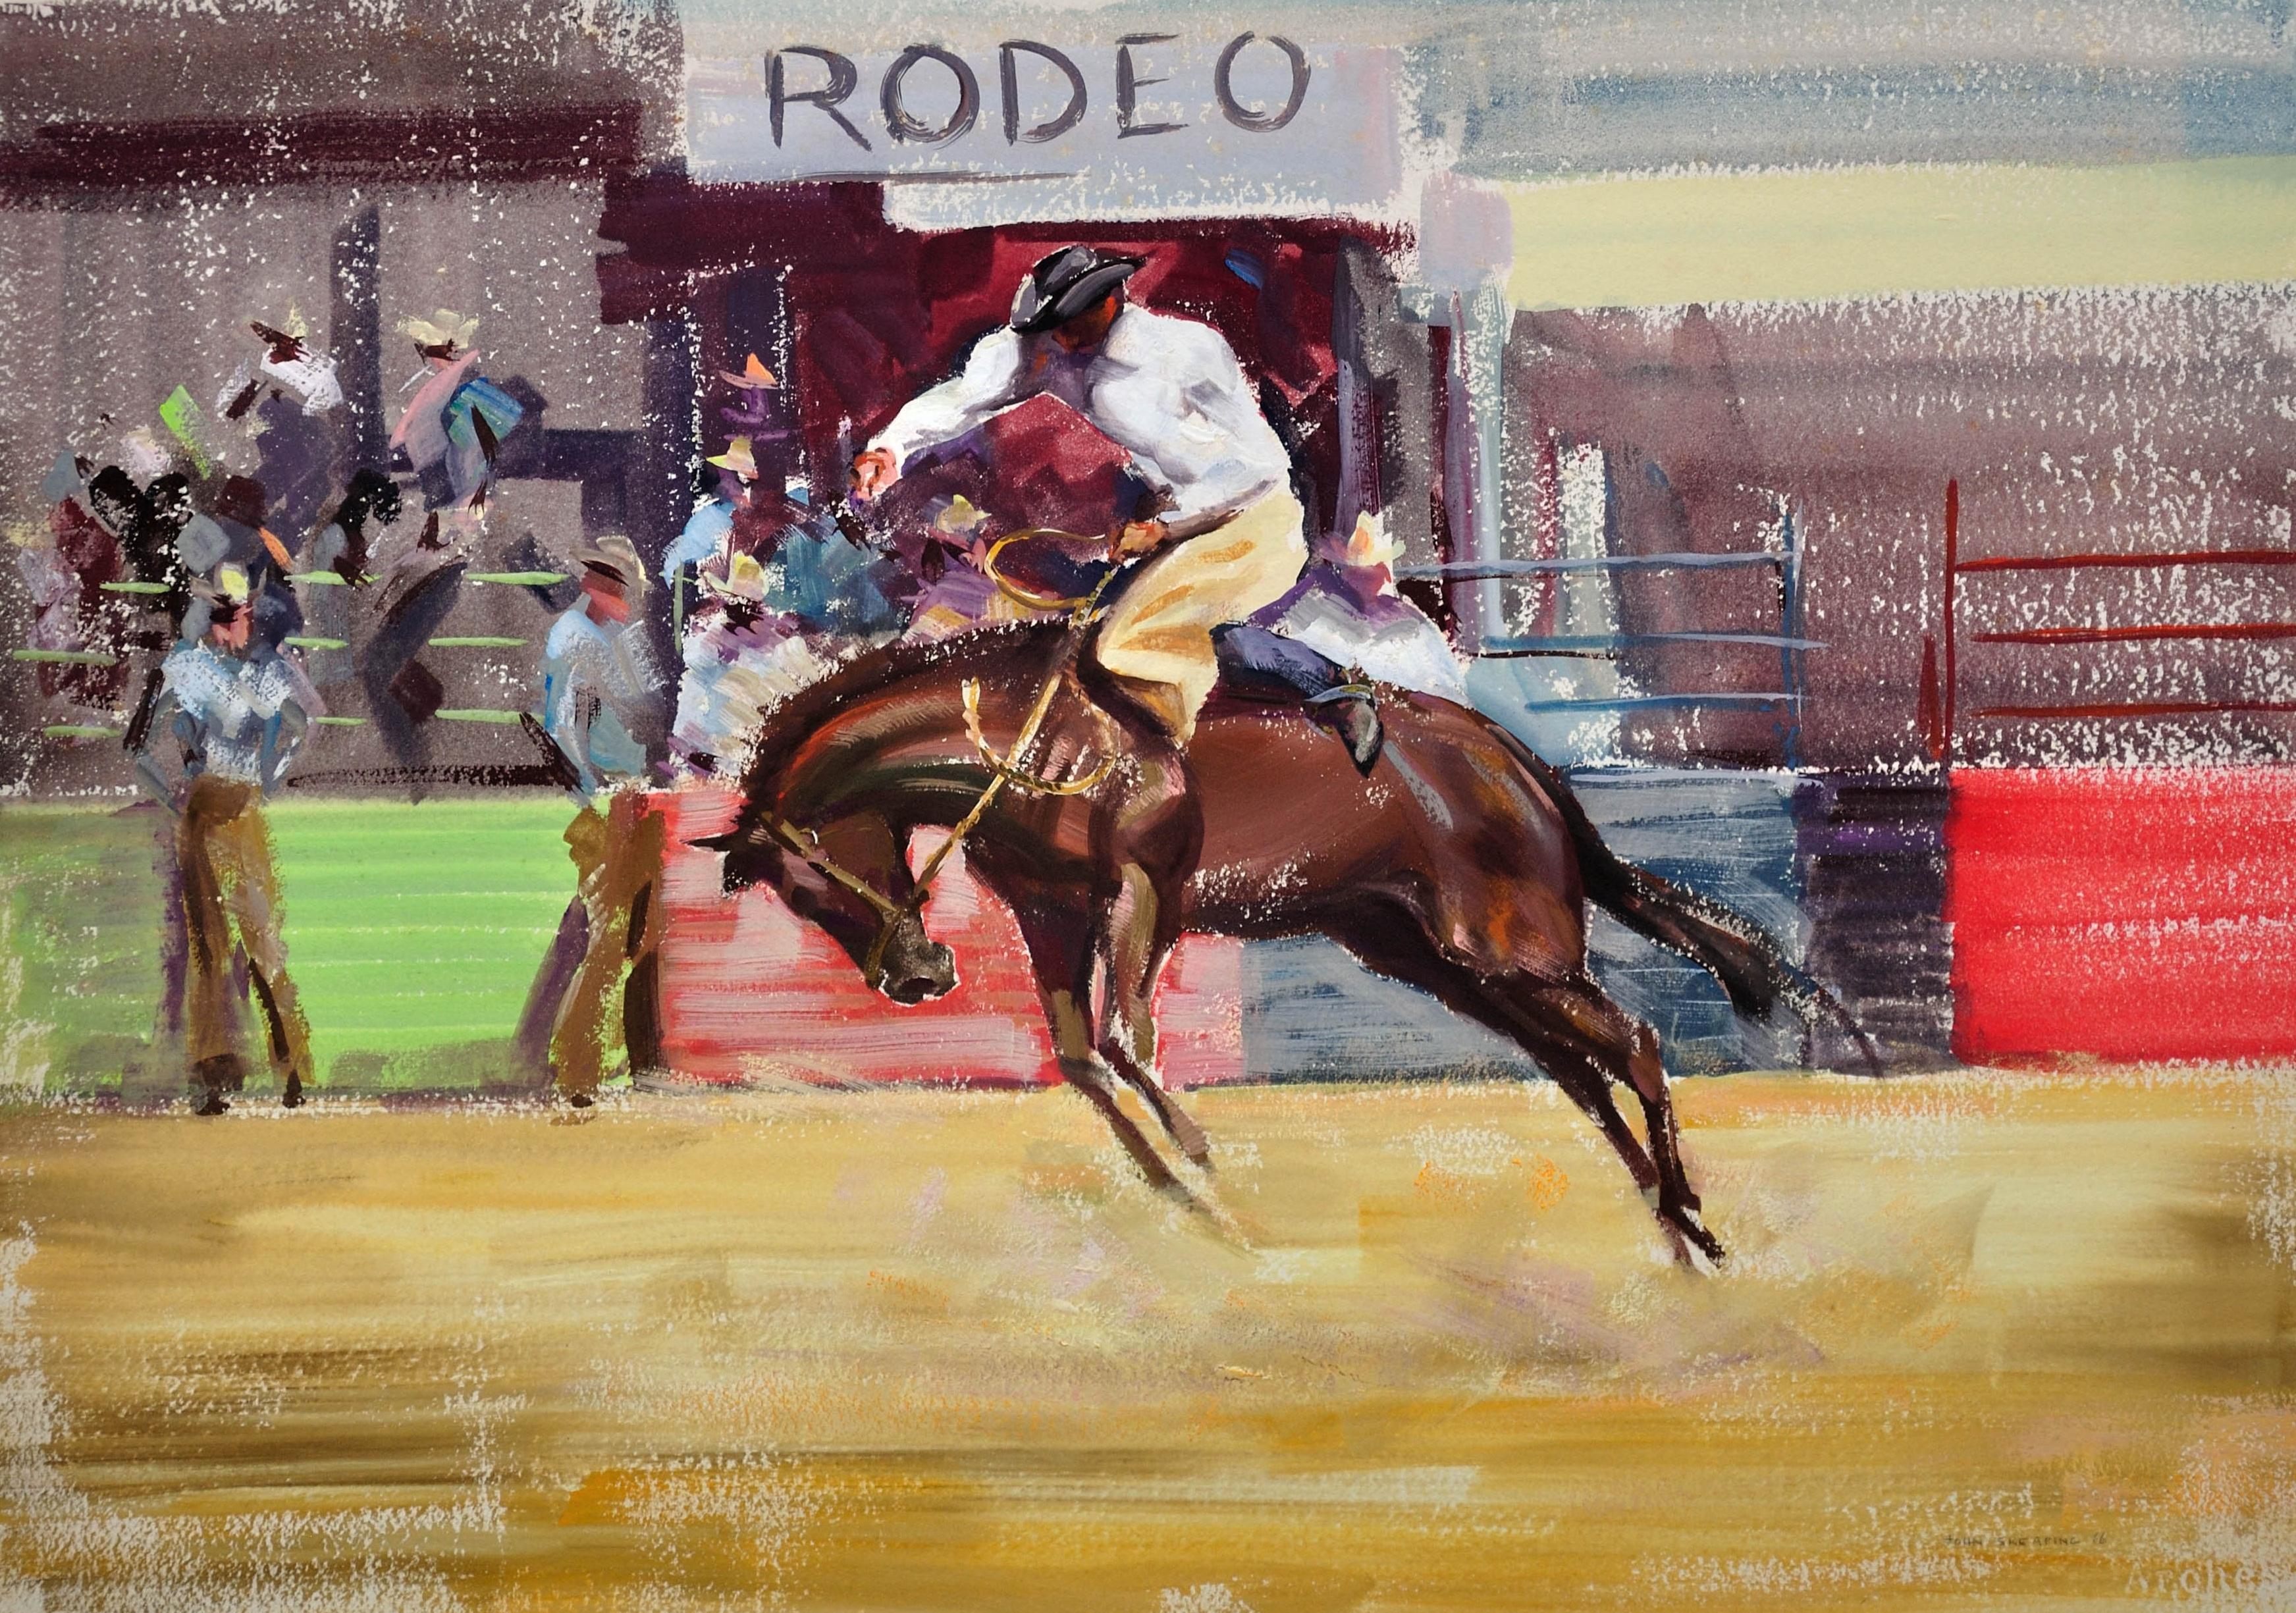 Rodeo. Bareback Bronco. Mid 20th Century. 1966. Western Cowboy Ranch Equestrian. - Painting by John Rattenbury Skeaping